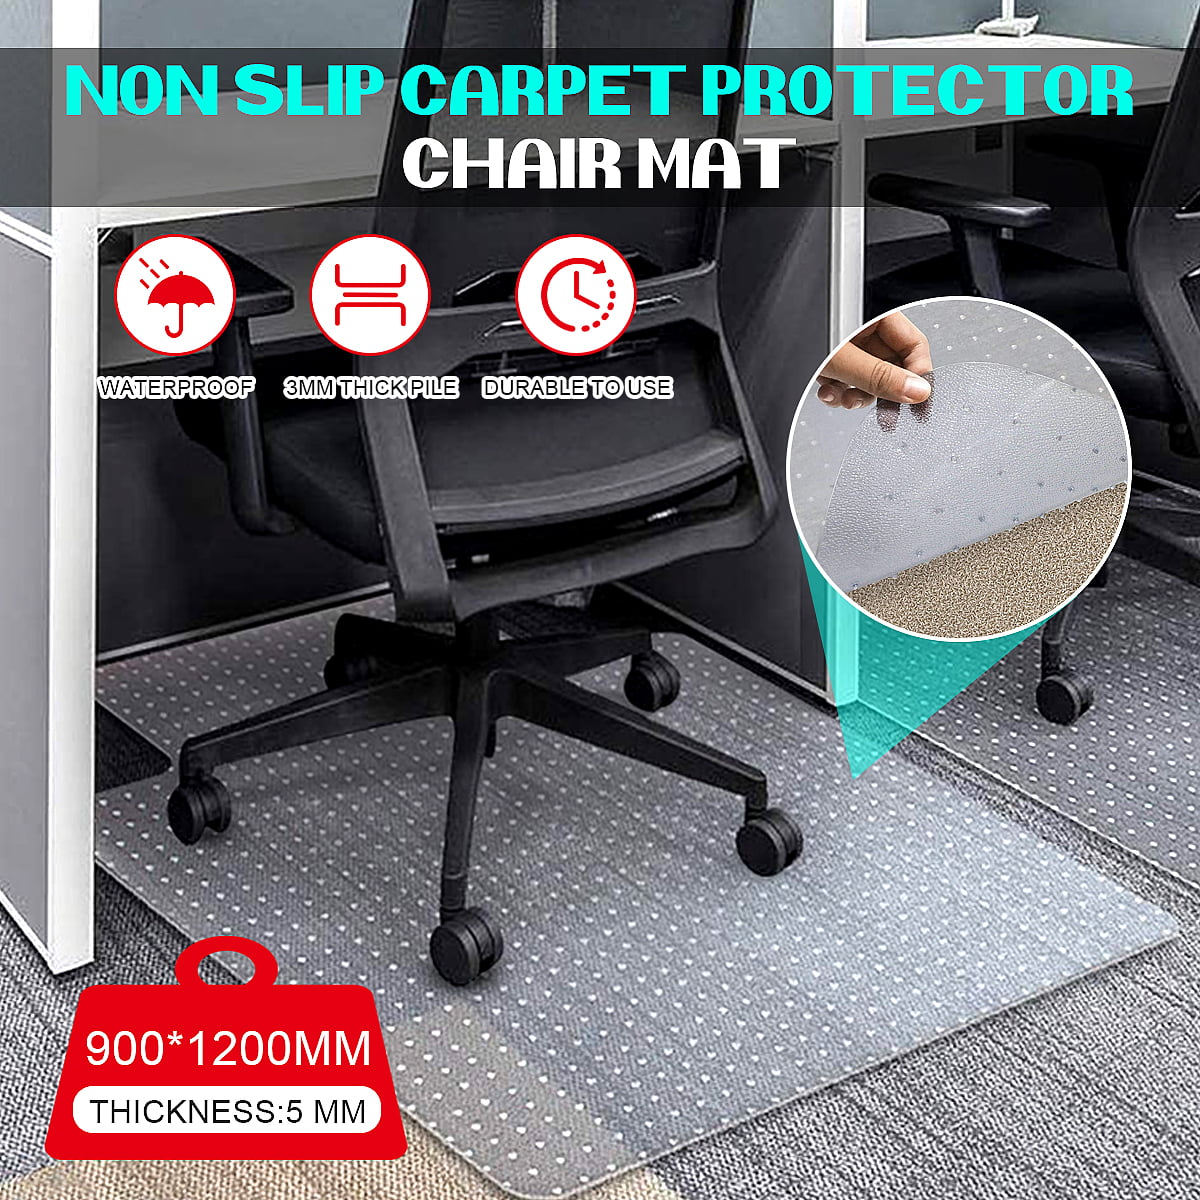 Floor Protector Carpet Chair Mat, Do You Need A Chair Mat For Tile